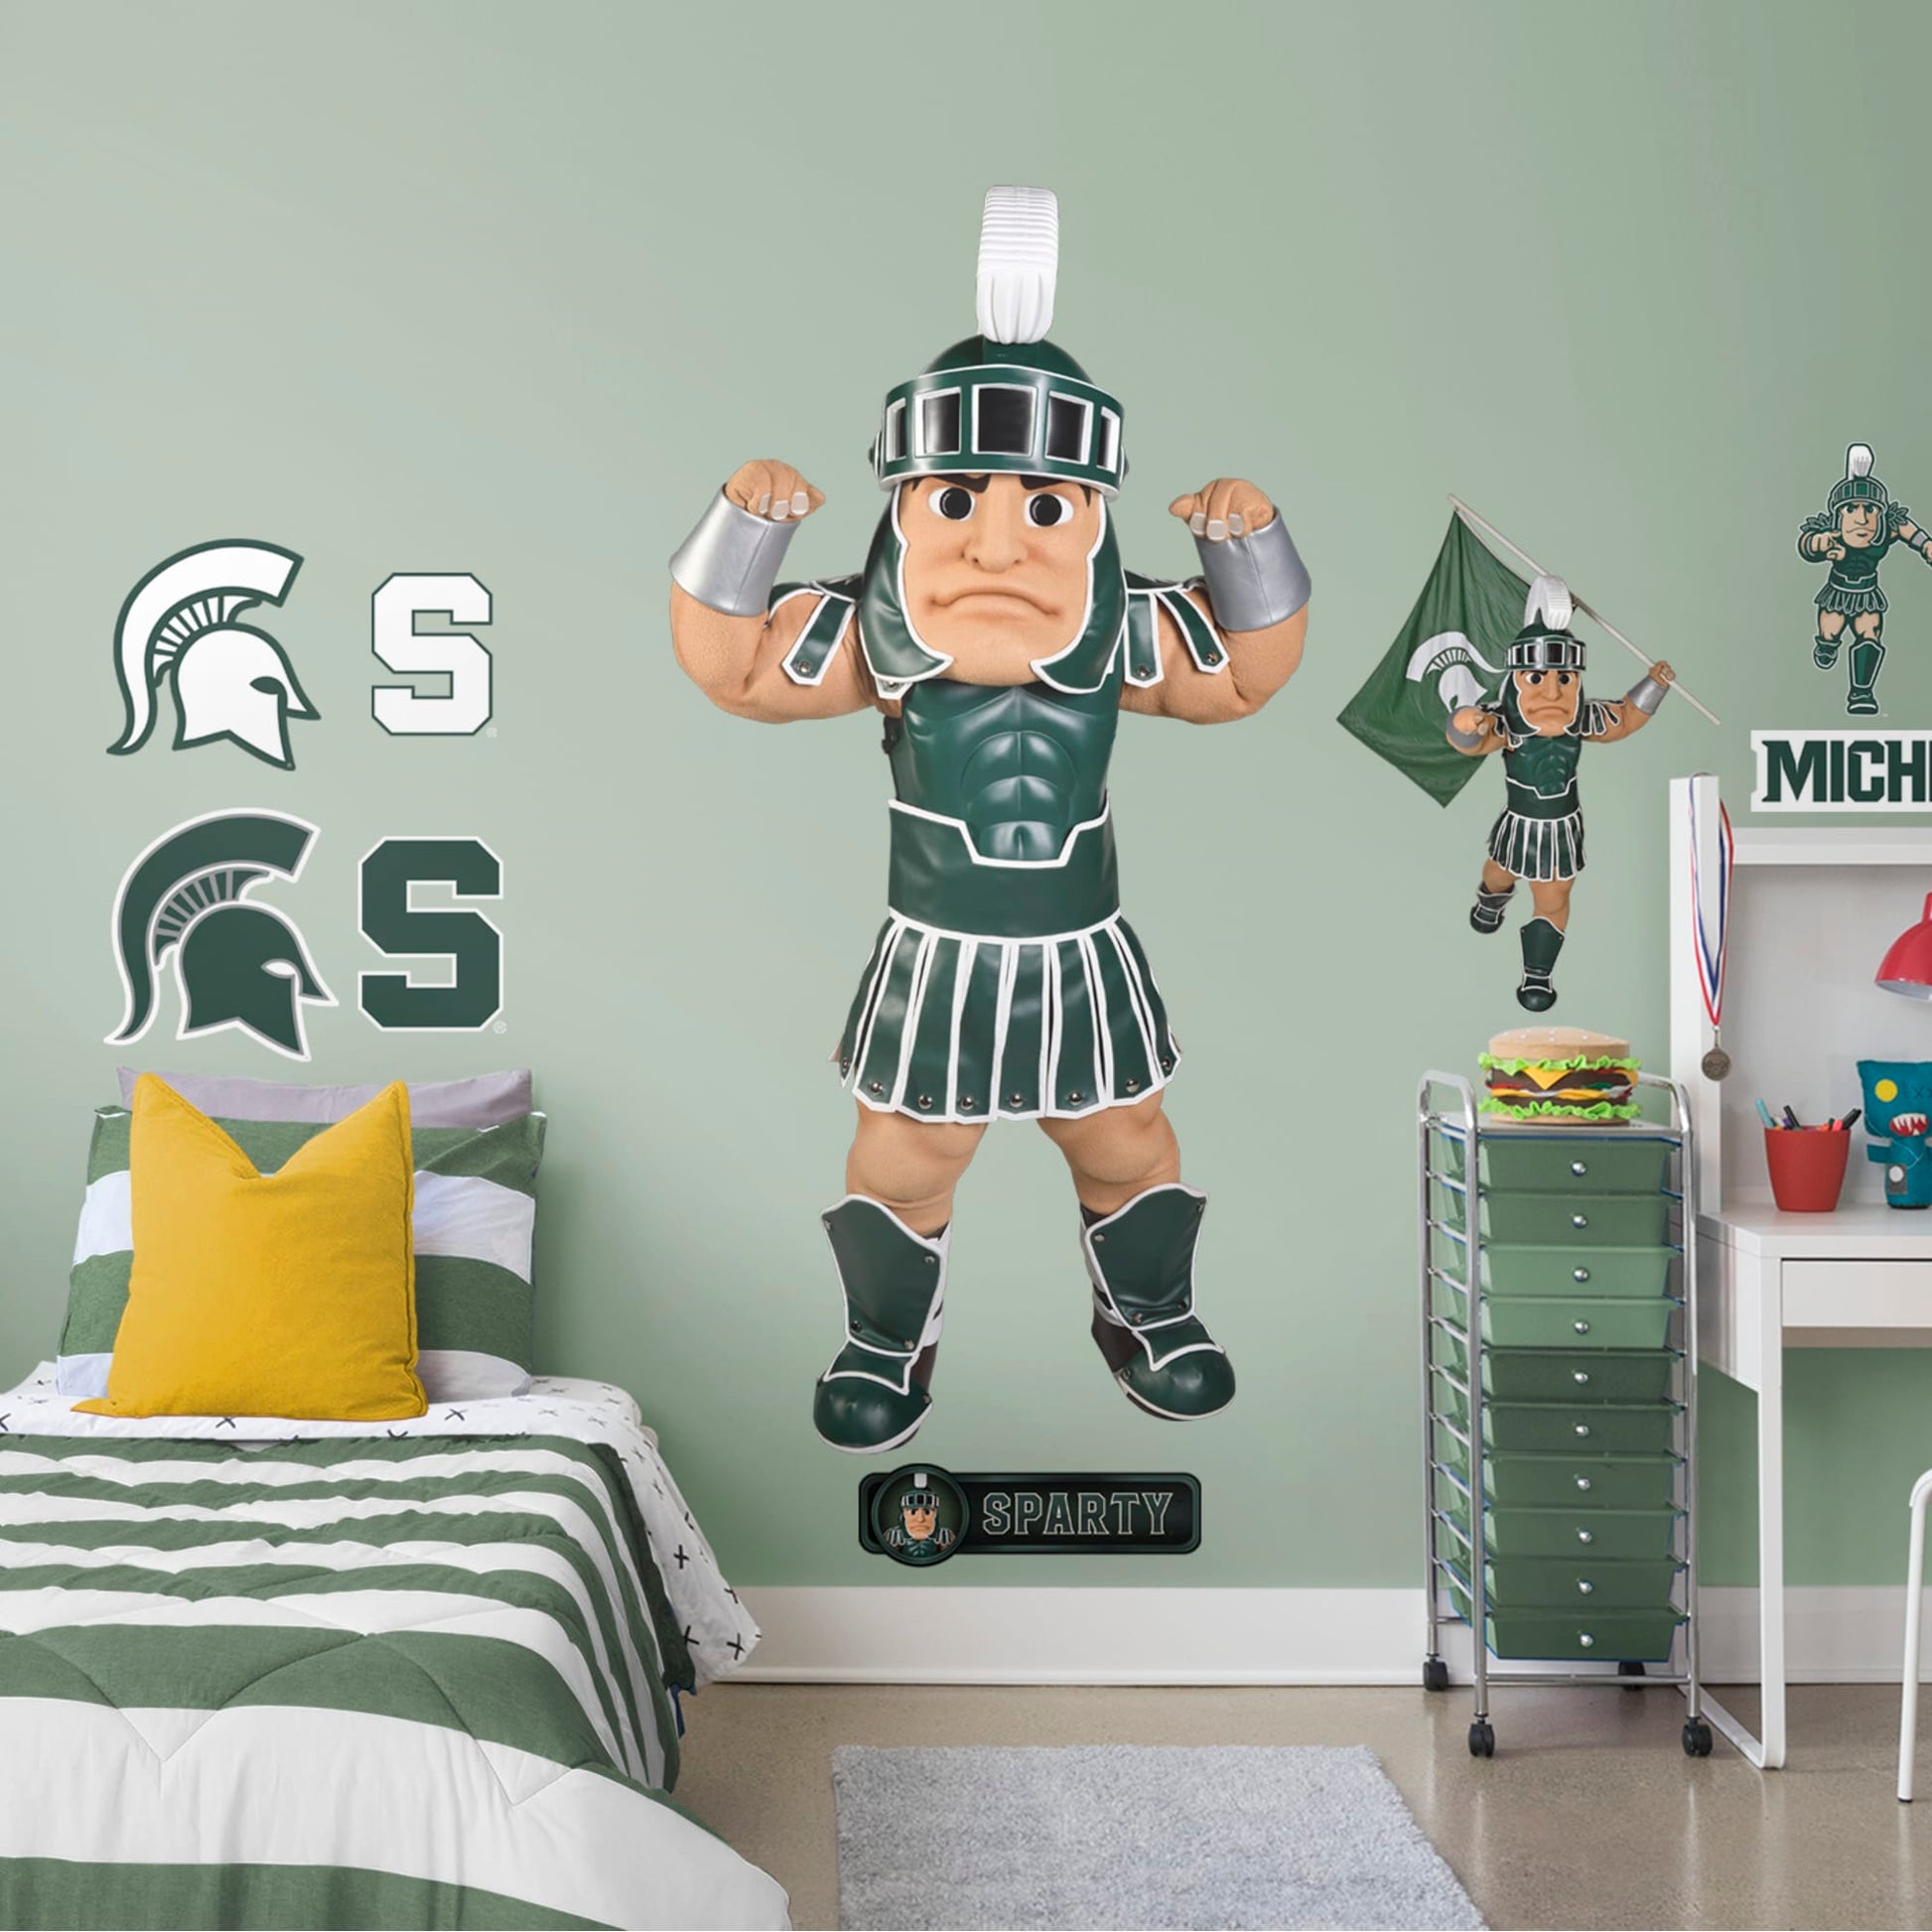 Life-Size Mascot +10 Decals (40"W x 80"H)